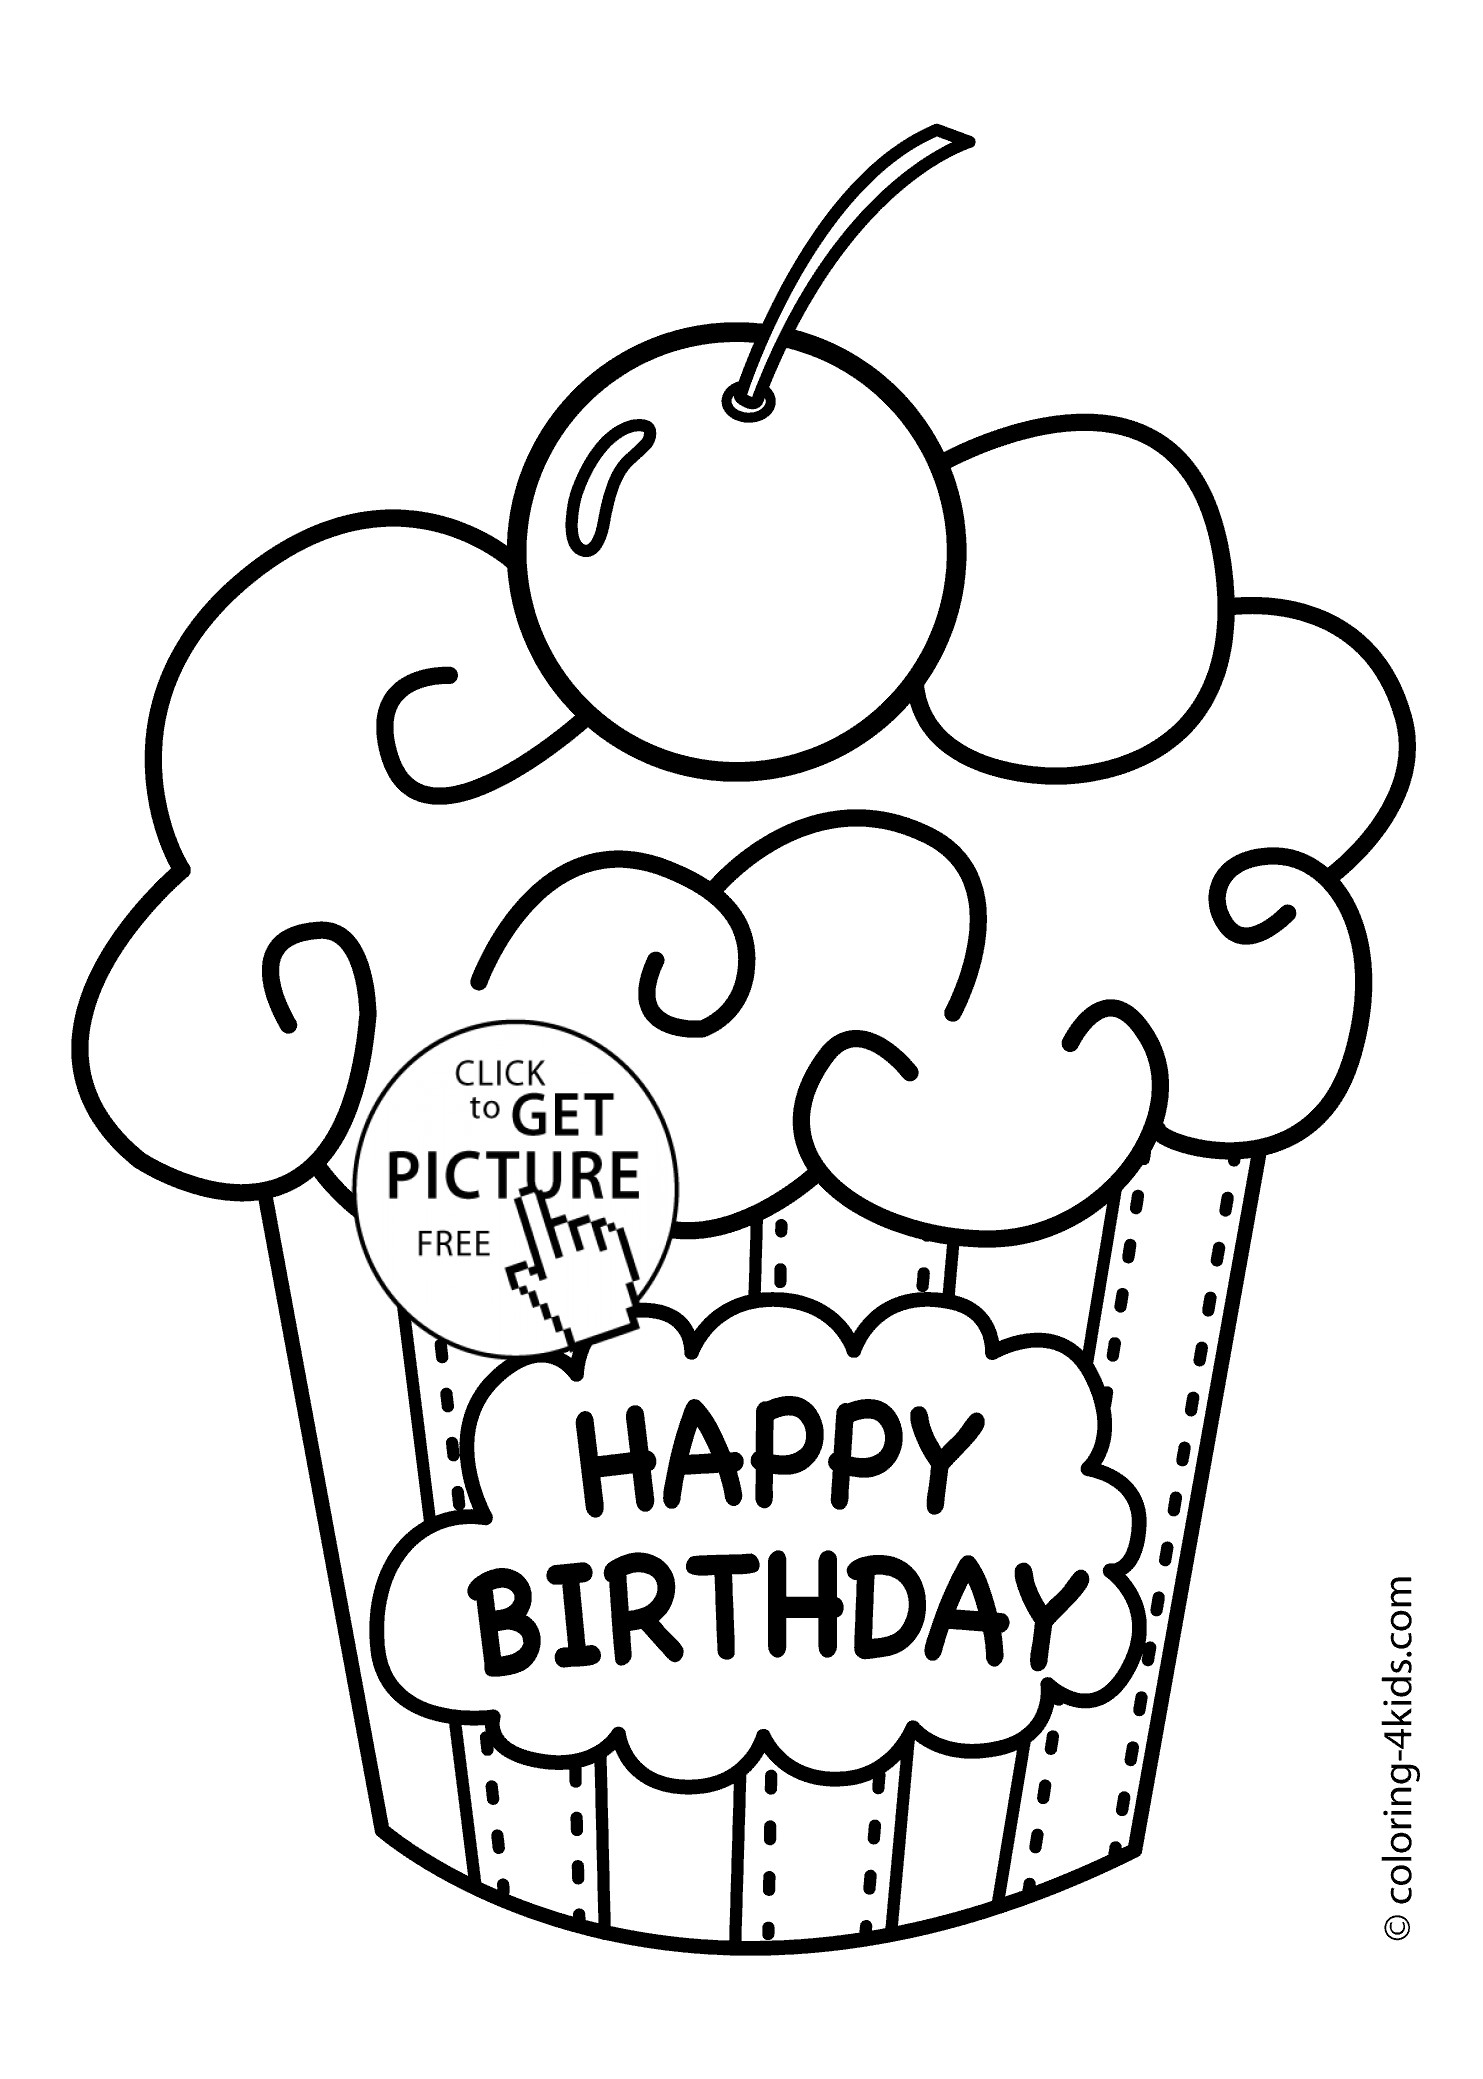 Happy Birthday Coloring Pages For Kids
 Cake Happy Birthday Party Coloring Pages – muffin coloring